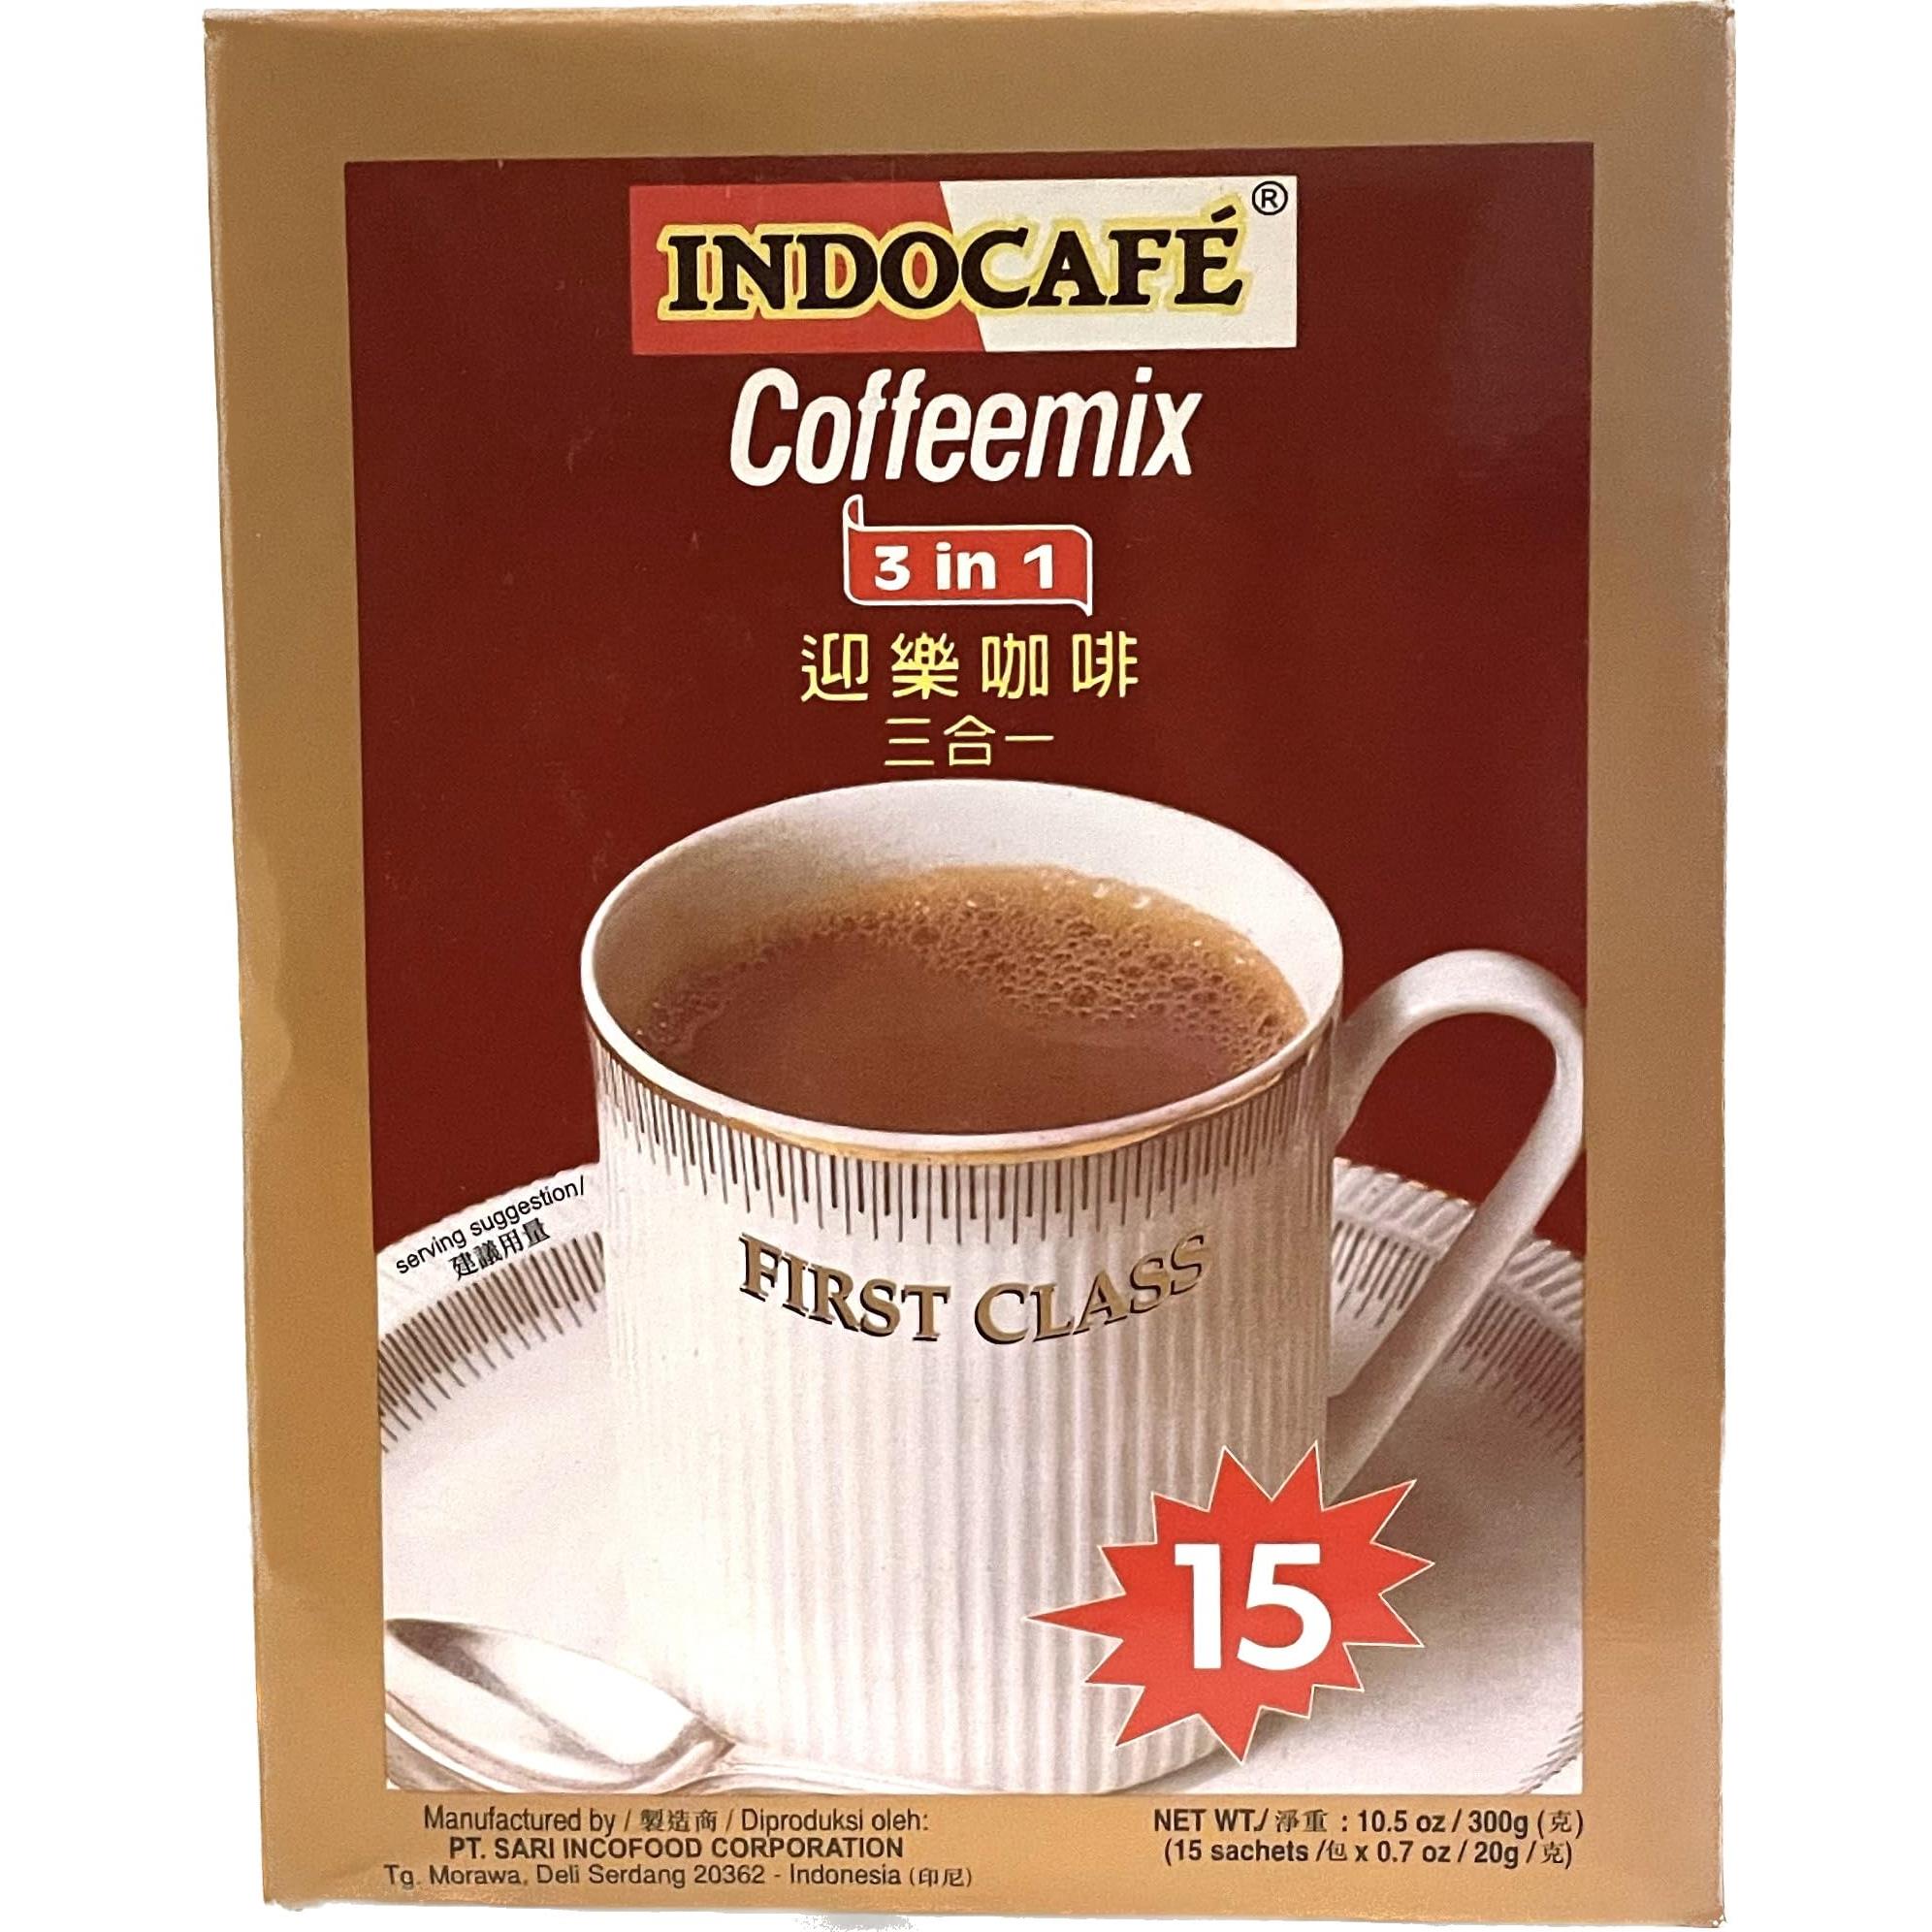 Indocafe Coffeemix 3 in 1 First Class, 15 Sachets Per Box